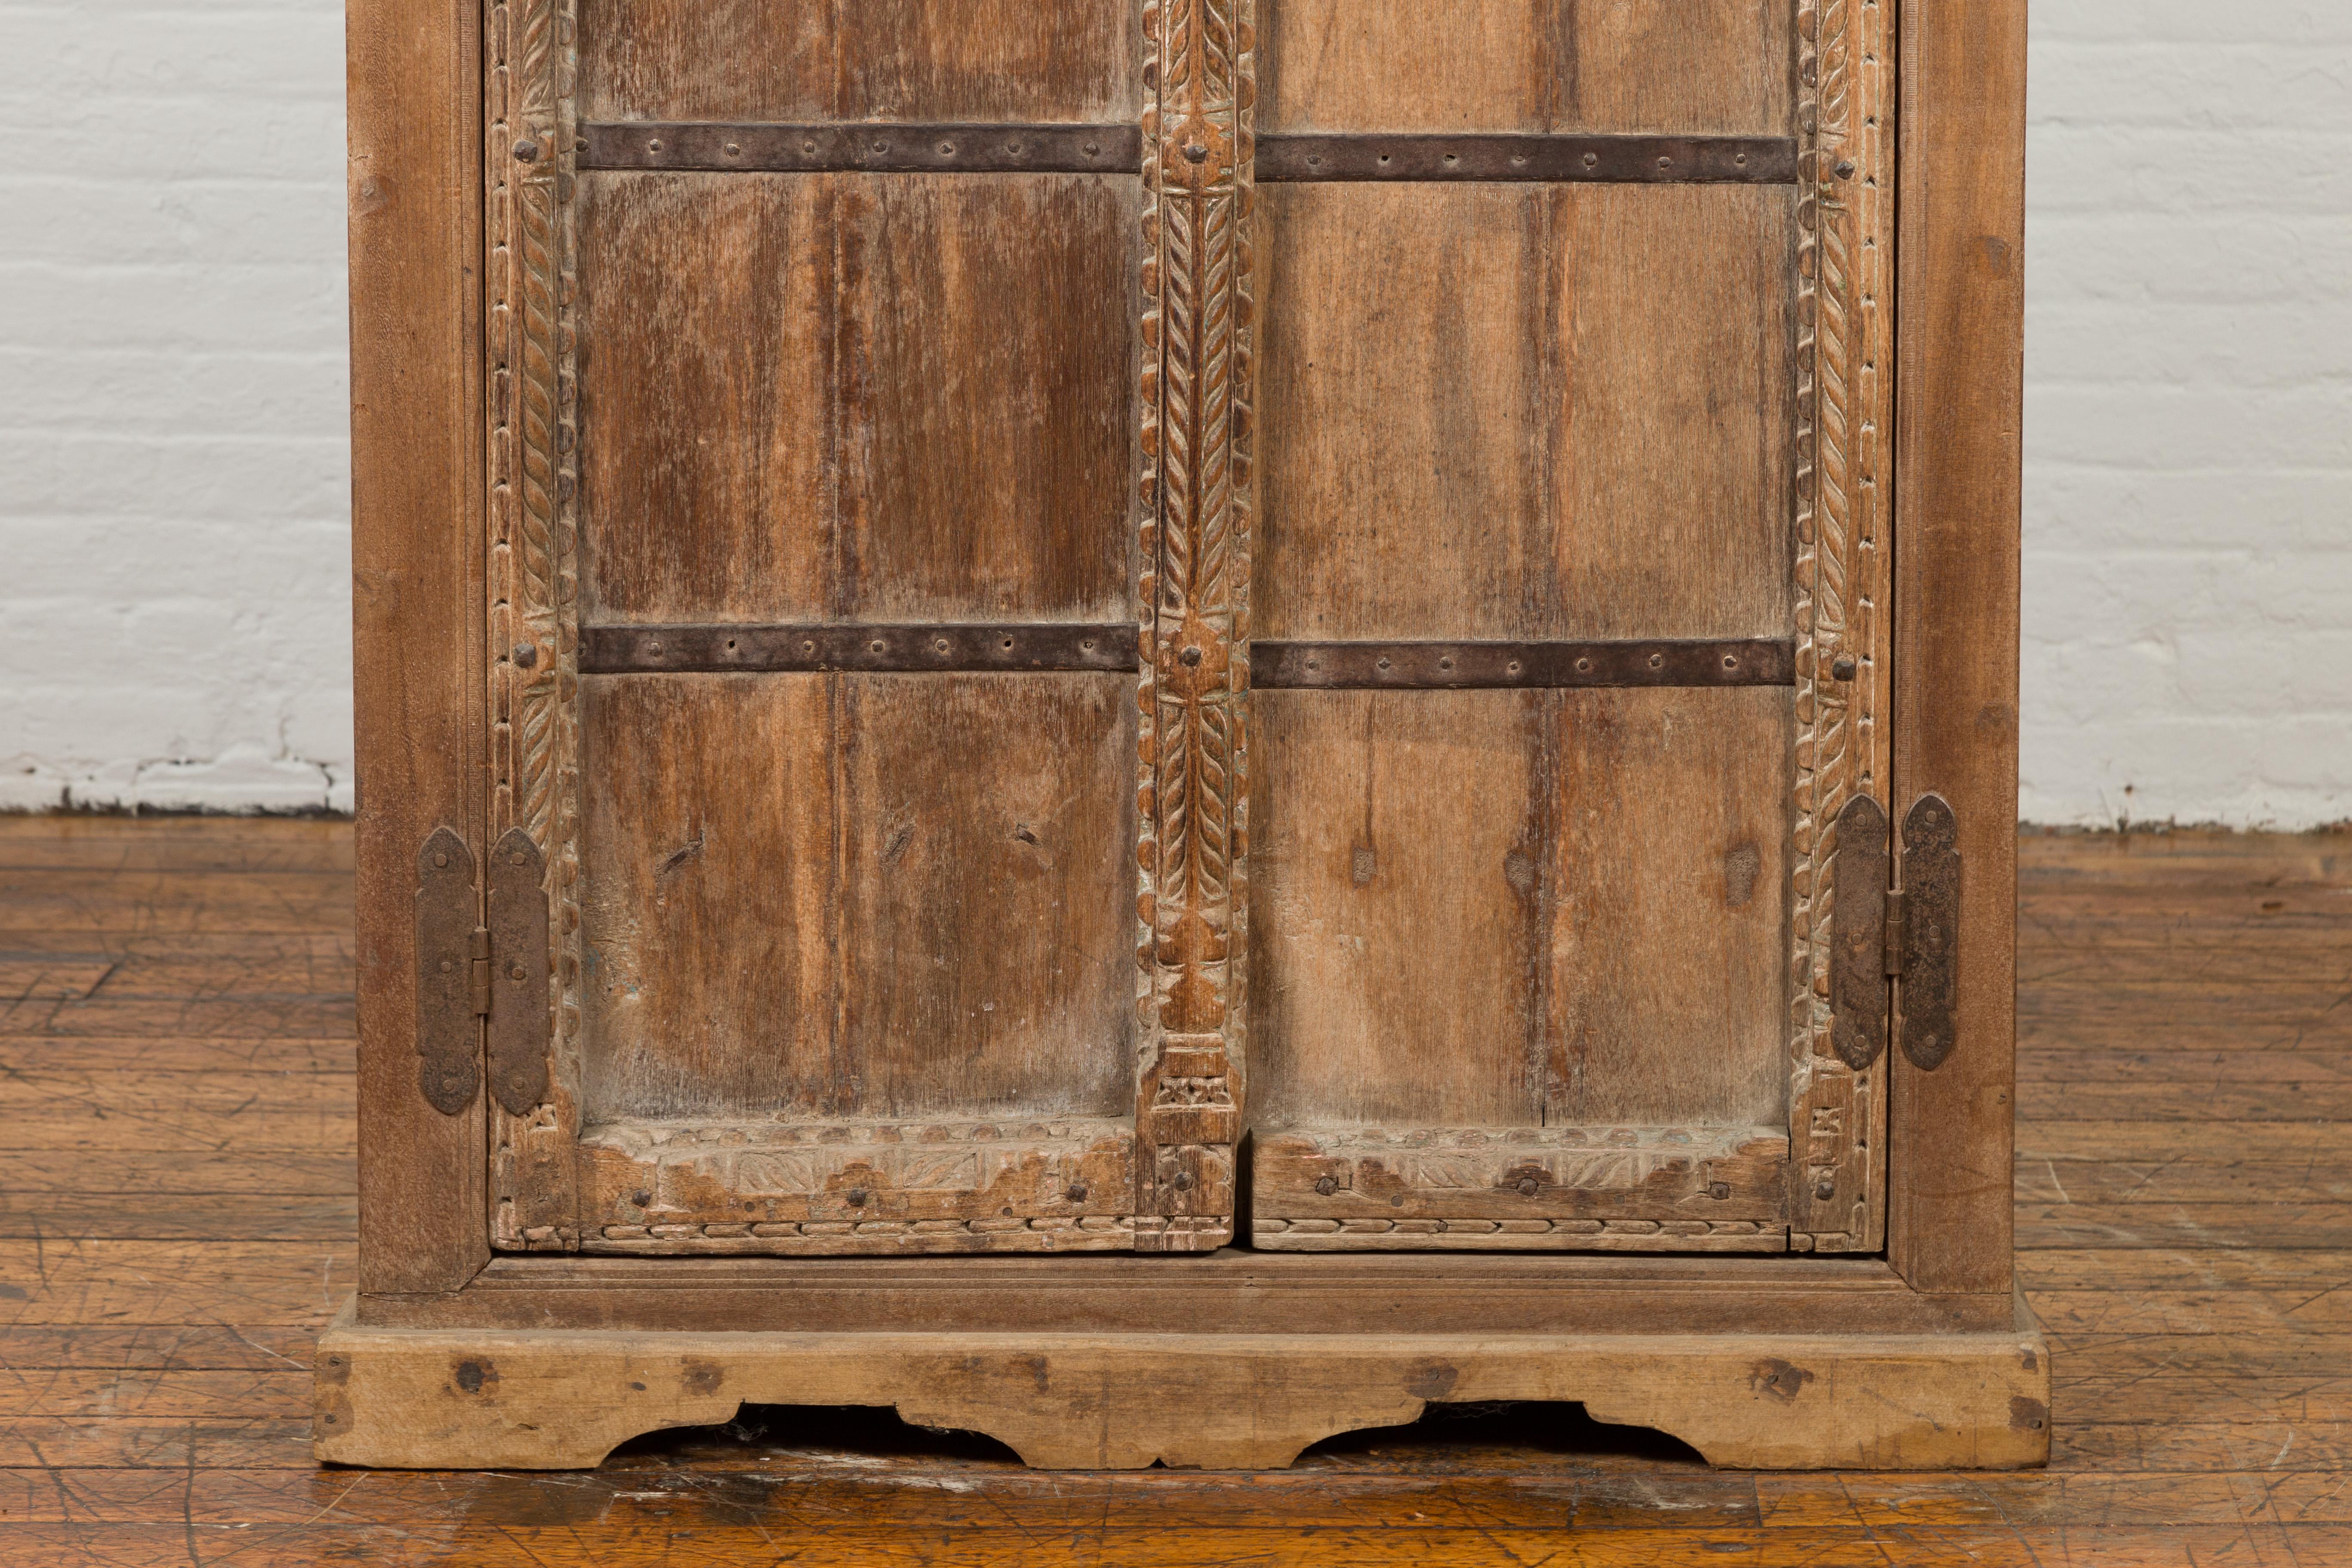 Indian 19th Century Sheesham Gujarat Cabinet with Carved Doors and Iron Accents 1